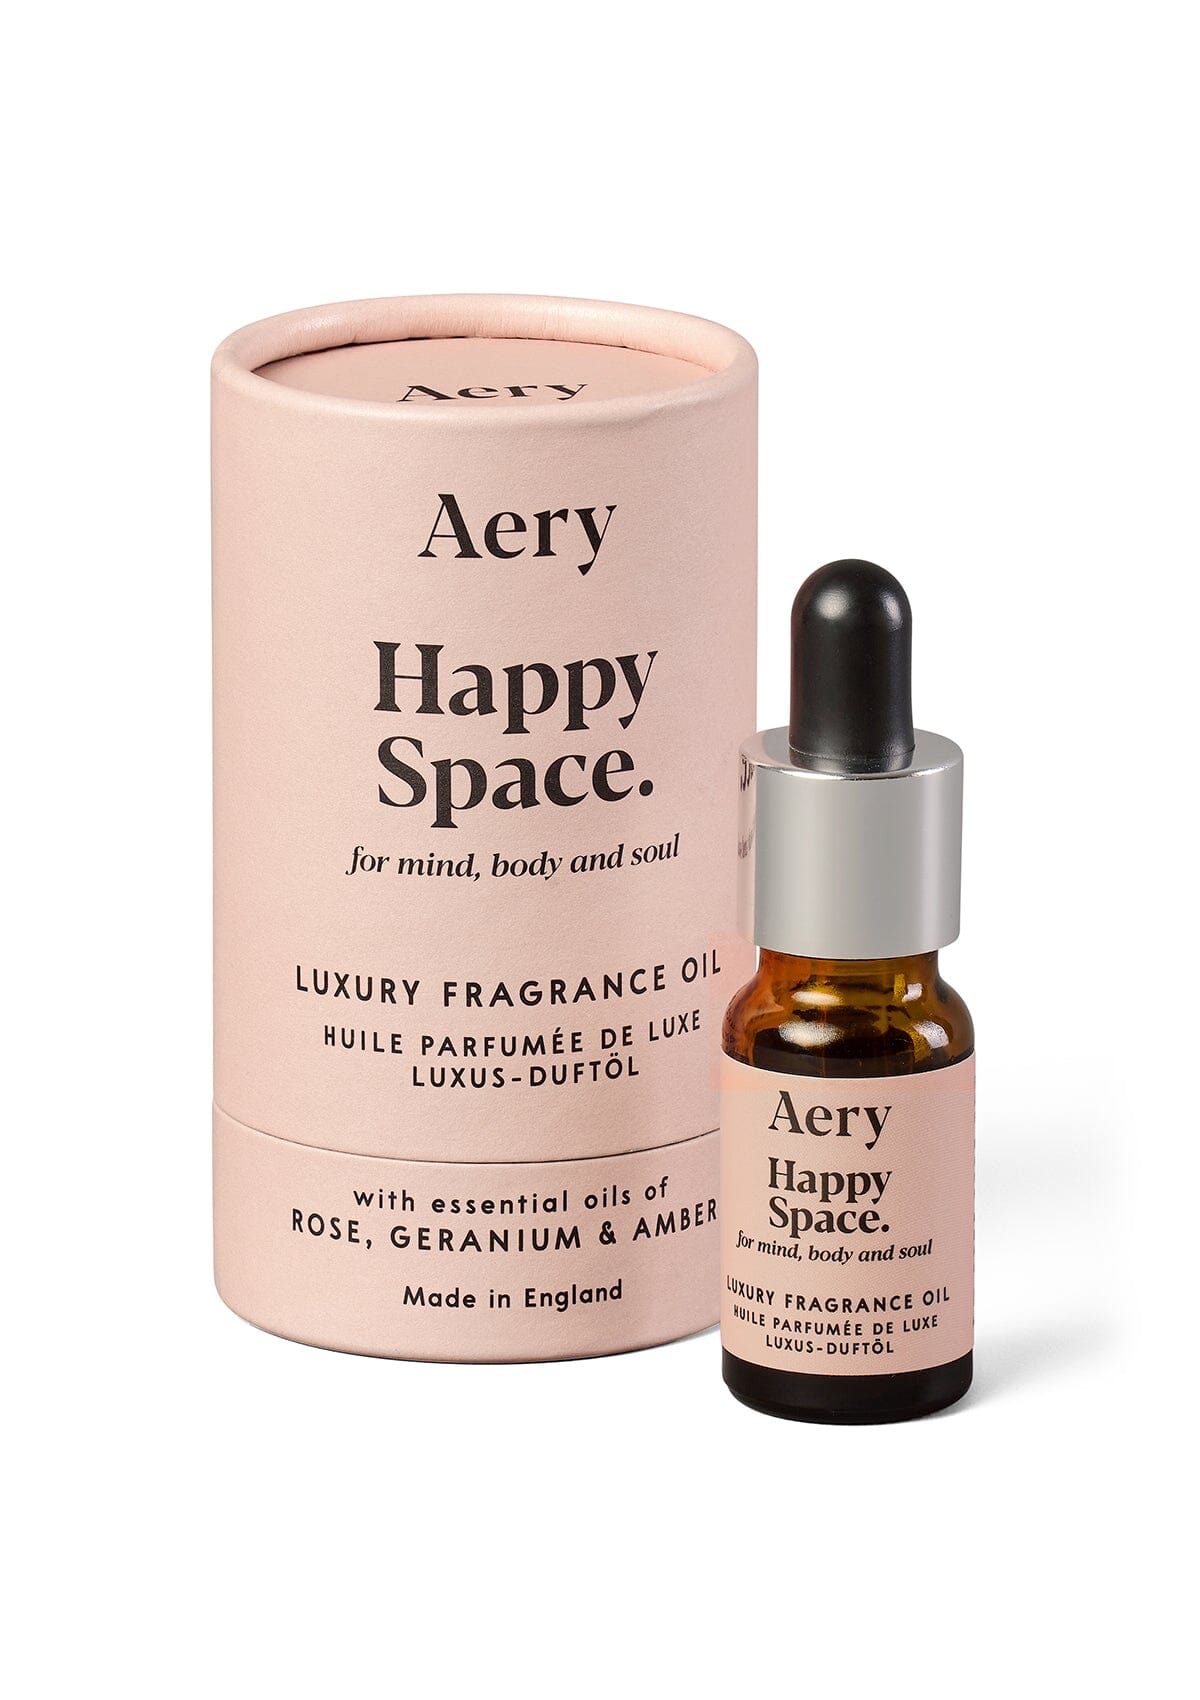 Pink Happy Space fragrance oil displayed next to product packaging by Aery on white background 